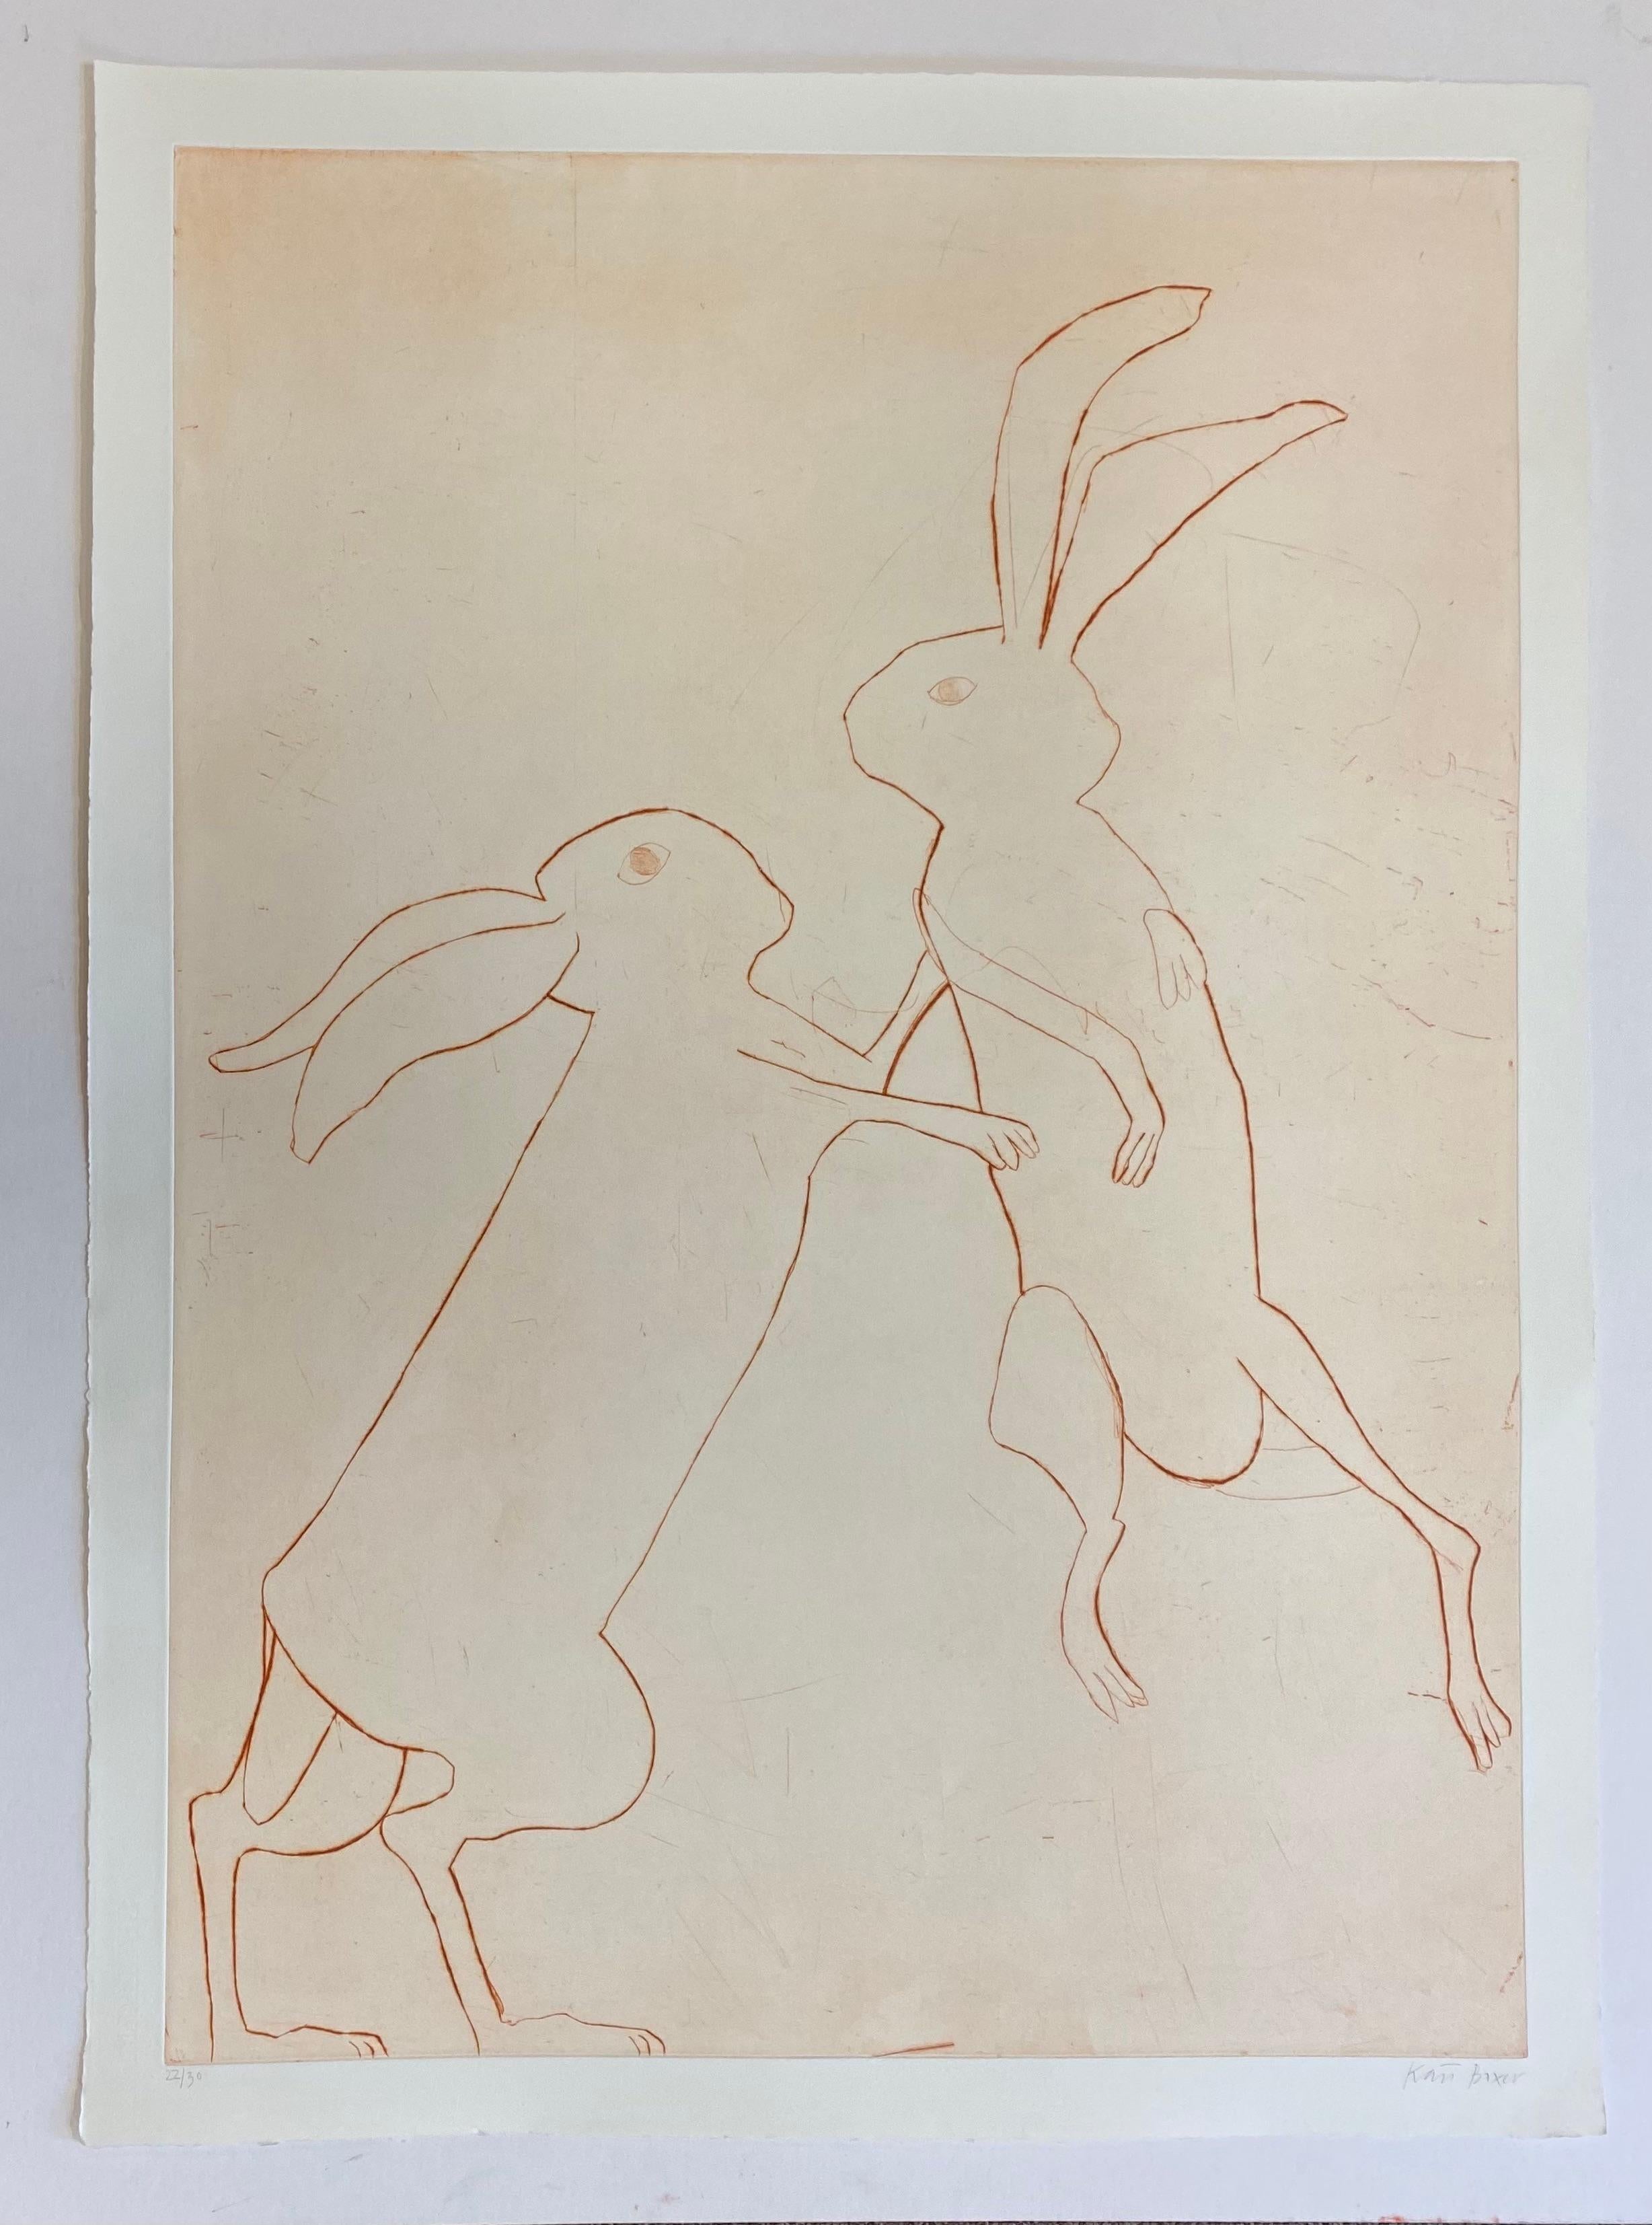 Kate Boxer – Boxing Hares.
Limited edition print, drypoint.
Image Size: H:99CM X W:70.5CM
Sheet Size: H:109CM X W:80.5CM

The sizes do vary slightly and each work is unique so vary in terms of colour as well. Please contact us before buying if you